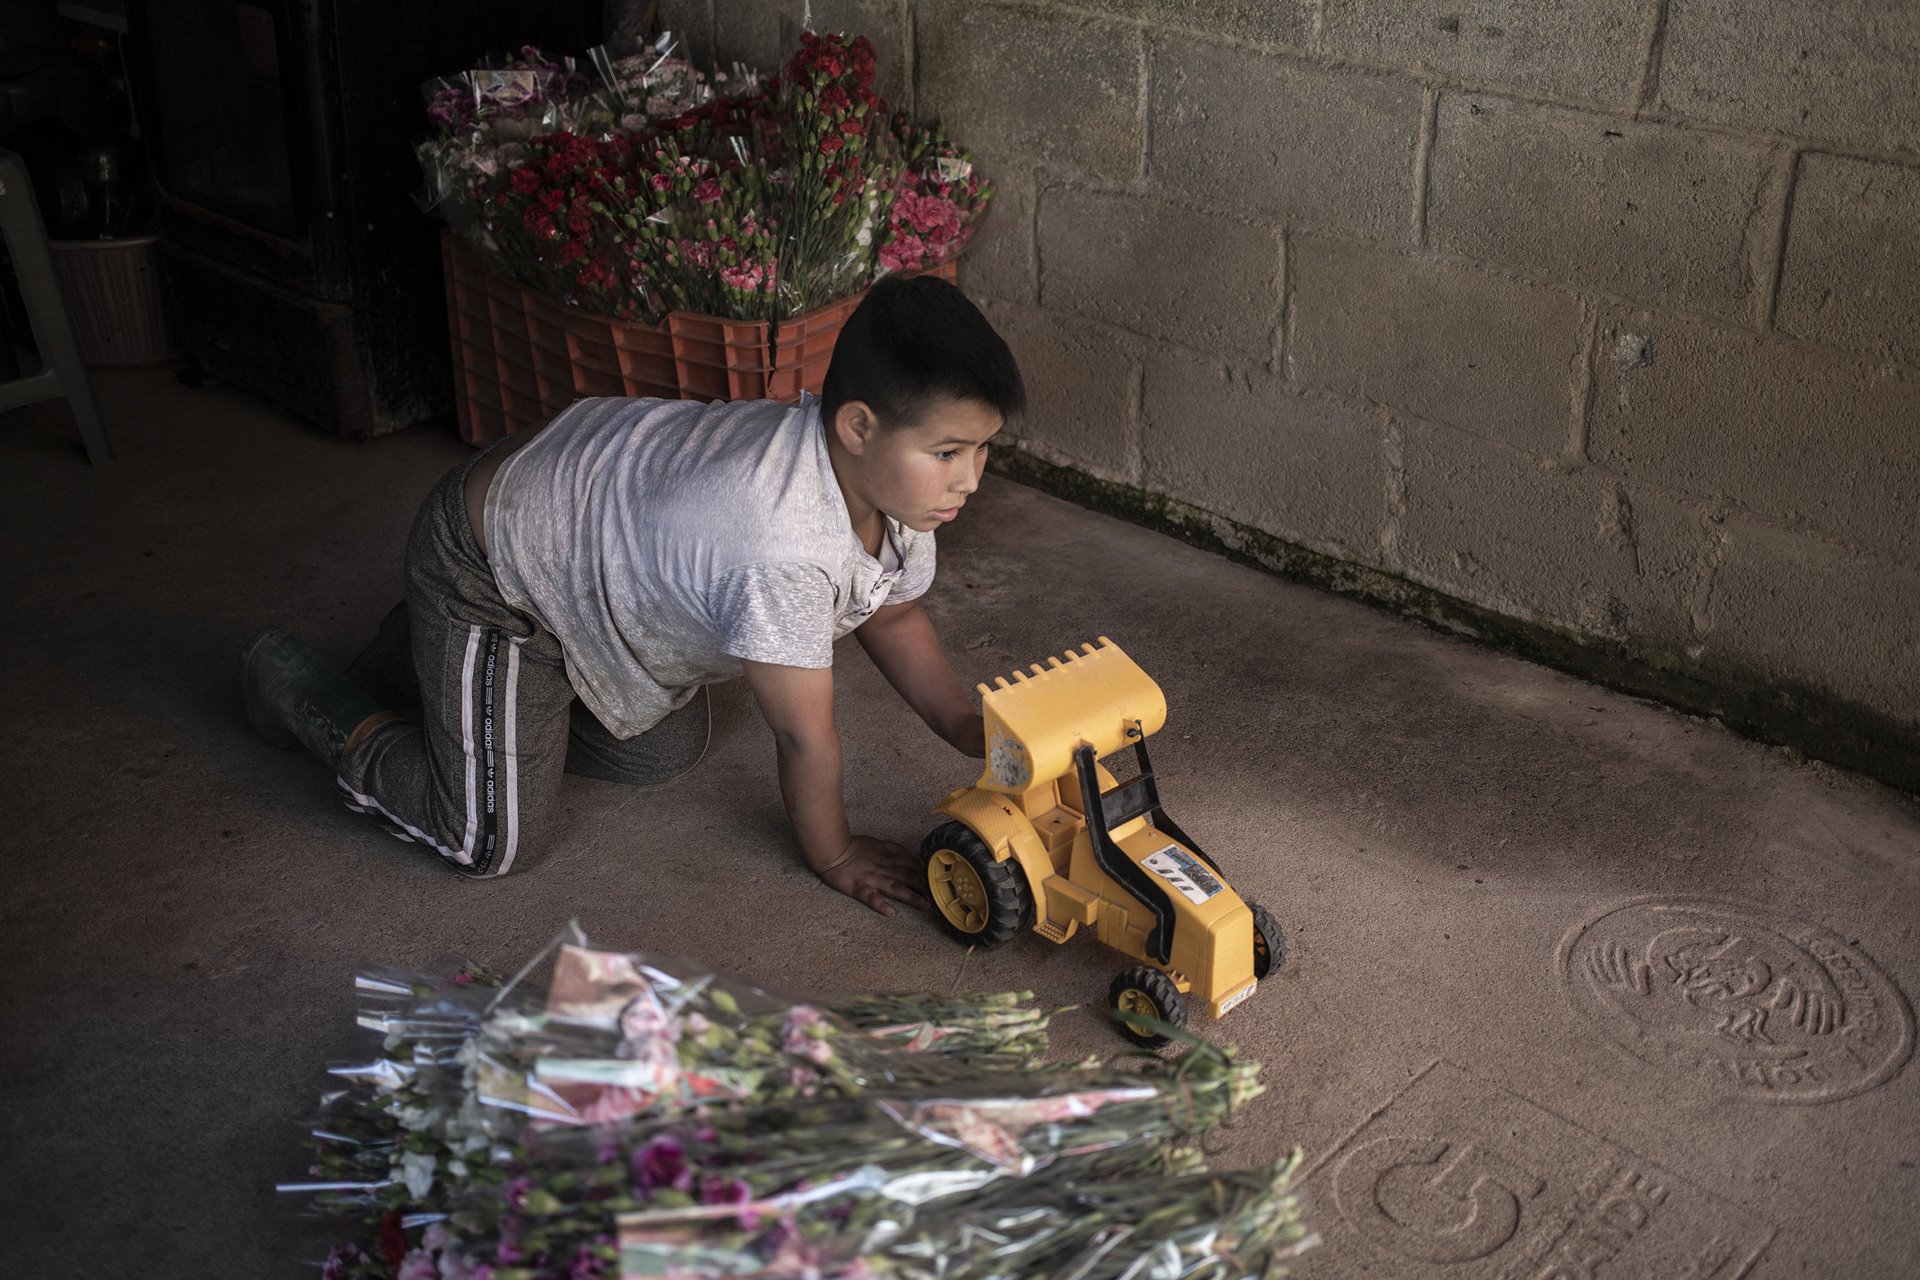 Josué (10) plays at home with a plastic tractor after helping his father, Don José, pack flower bouquets, in Villa Guerrero, Mexico.